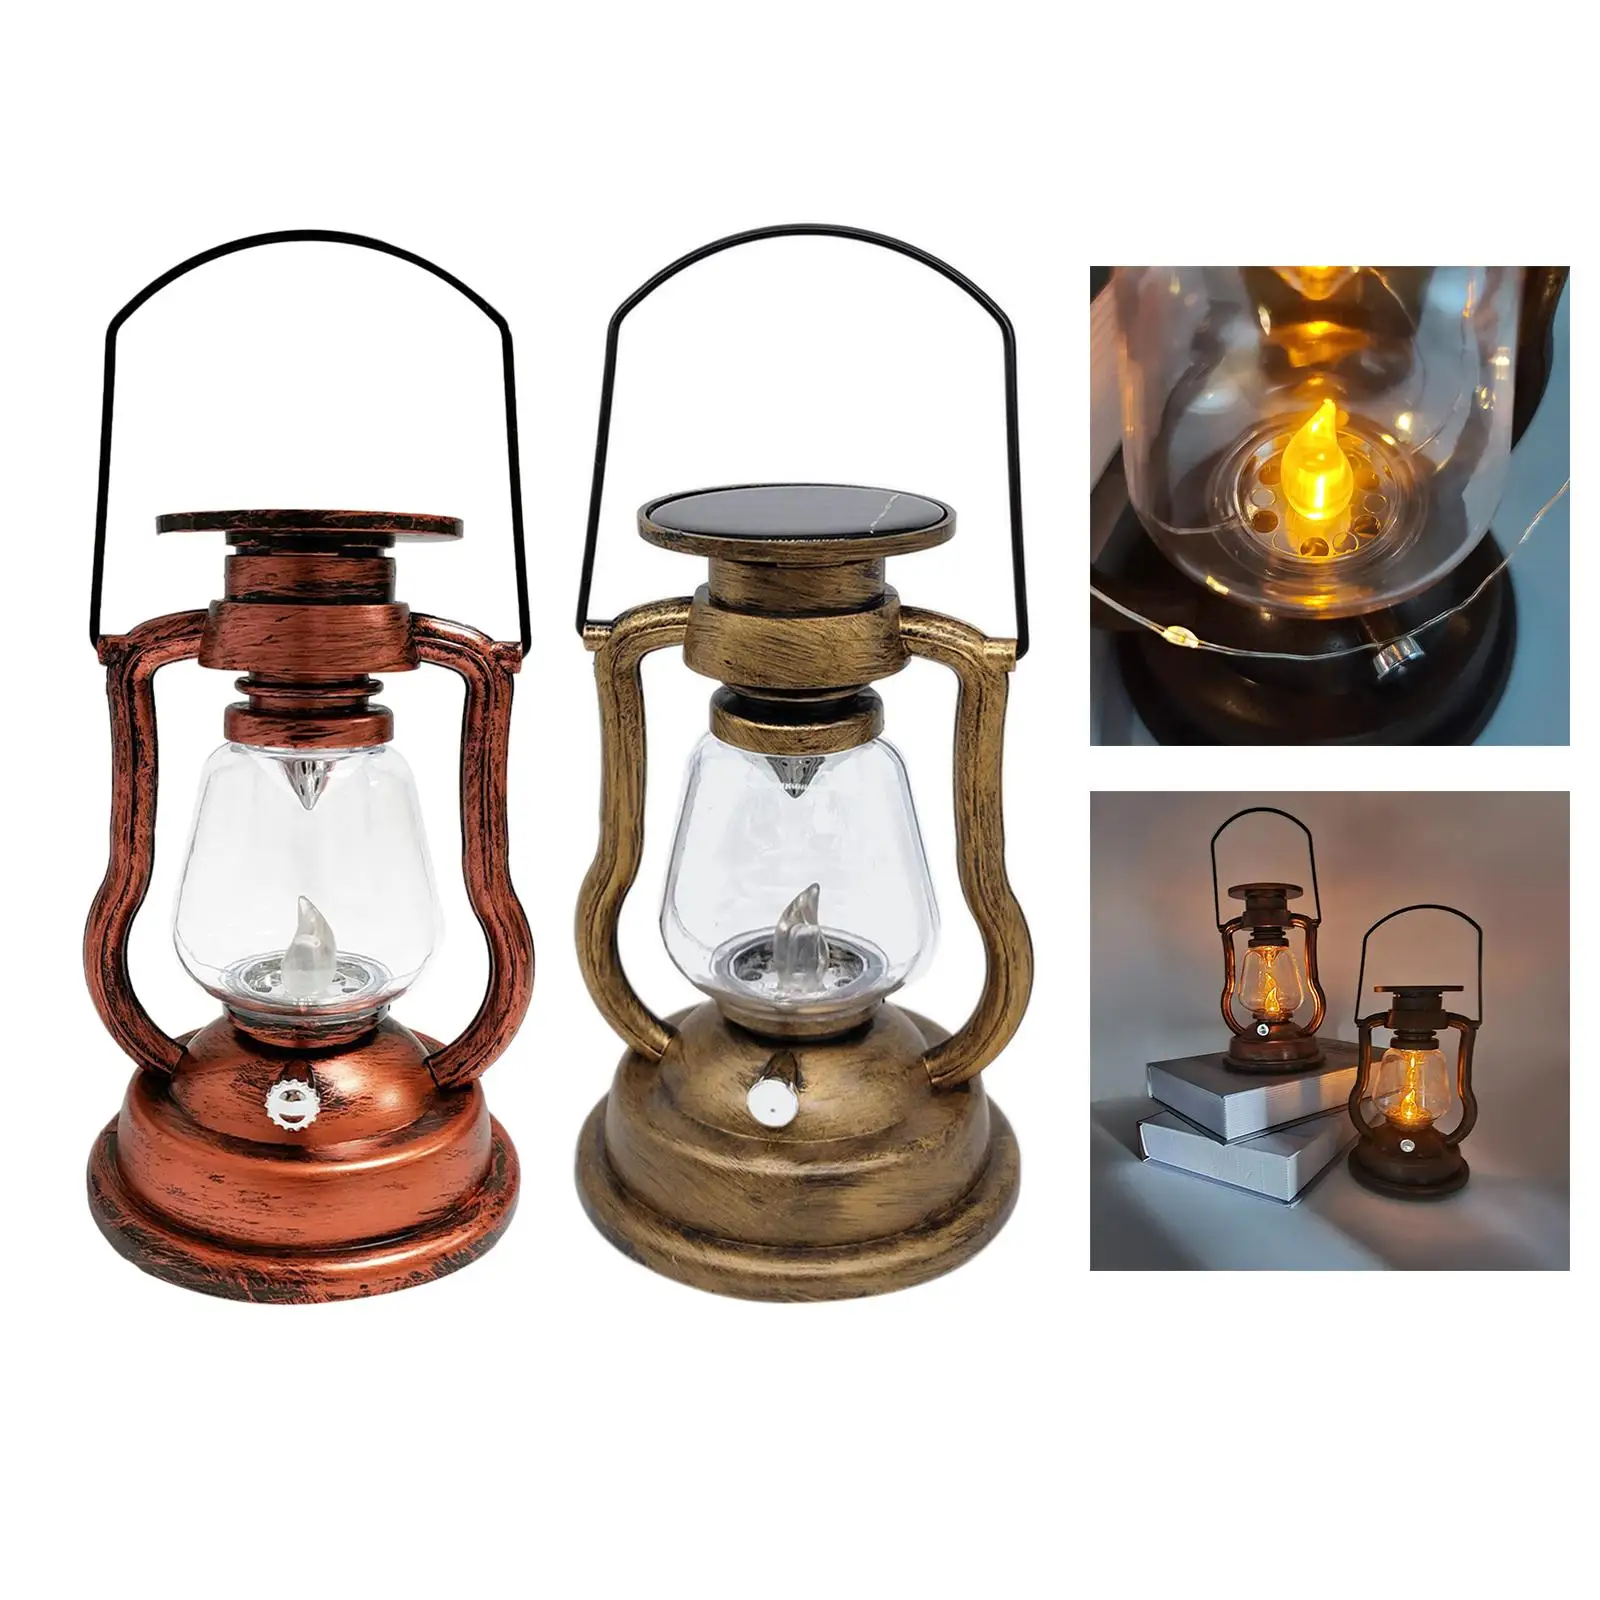 Camping Lanterns Solar Power Outage Fishing Lighting Waterproof Handheld or Hanging Tent Light for Fence Patio Yard Decoration